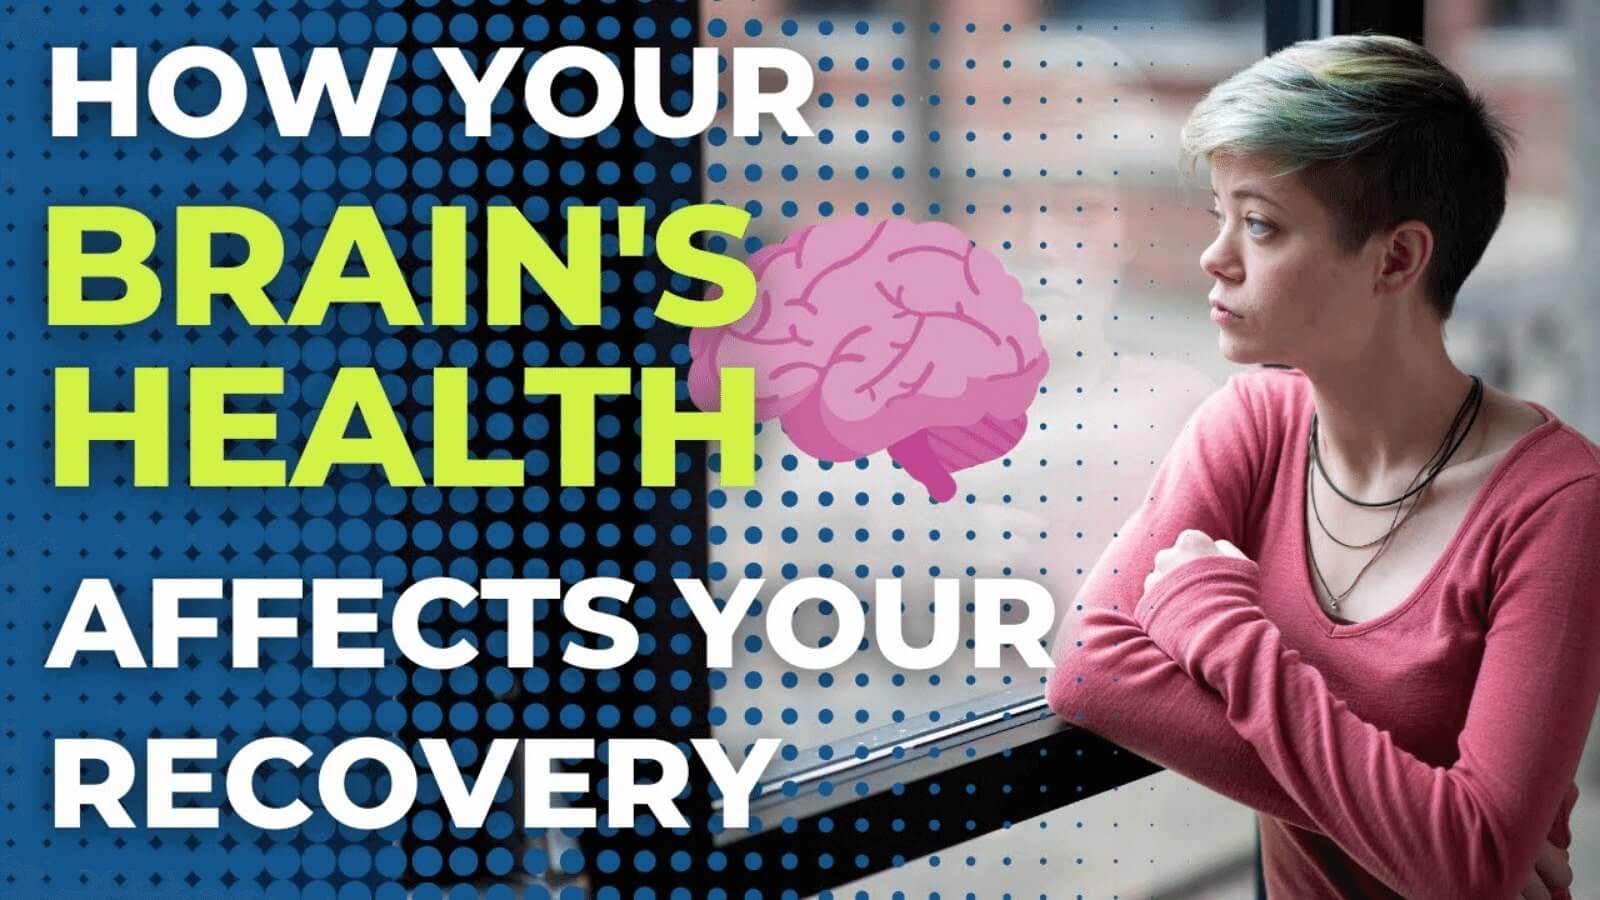 How your brain's health affects your recovery video thumbnail